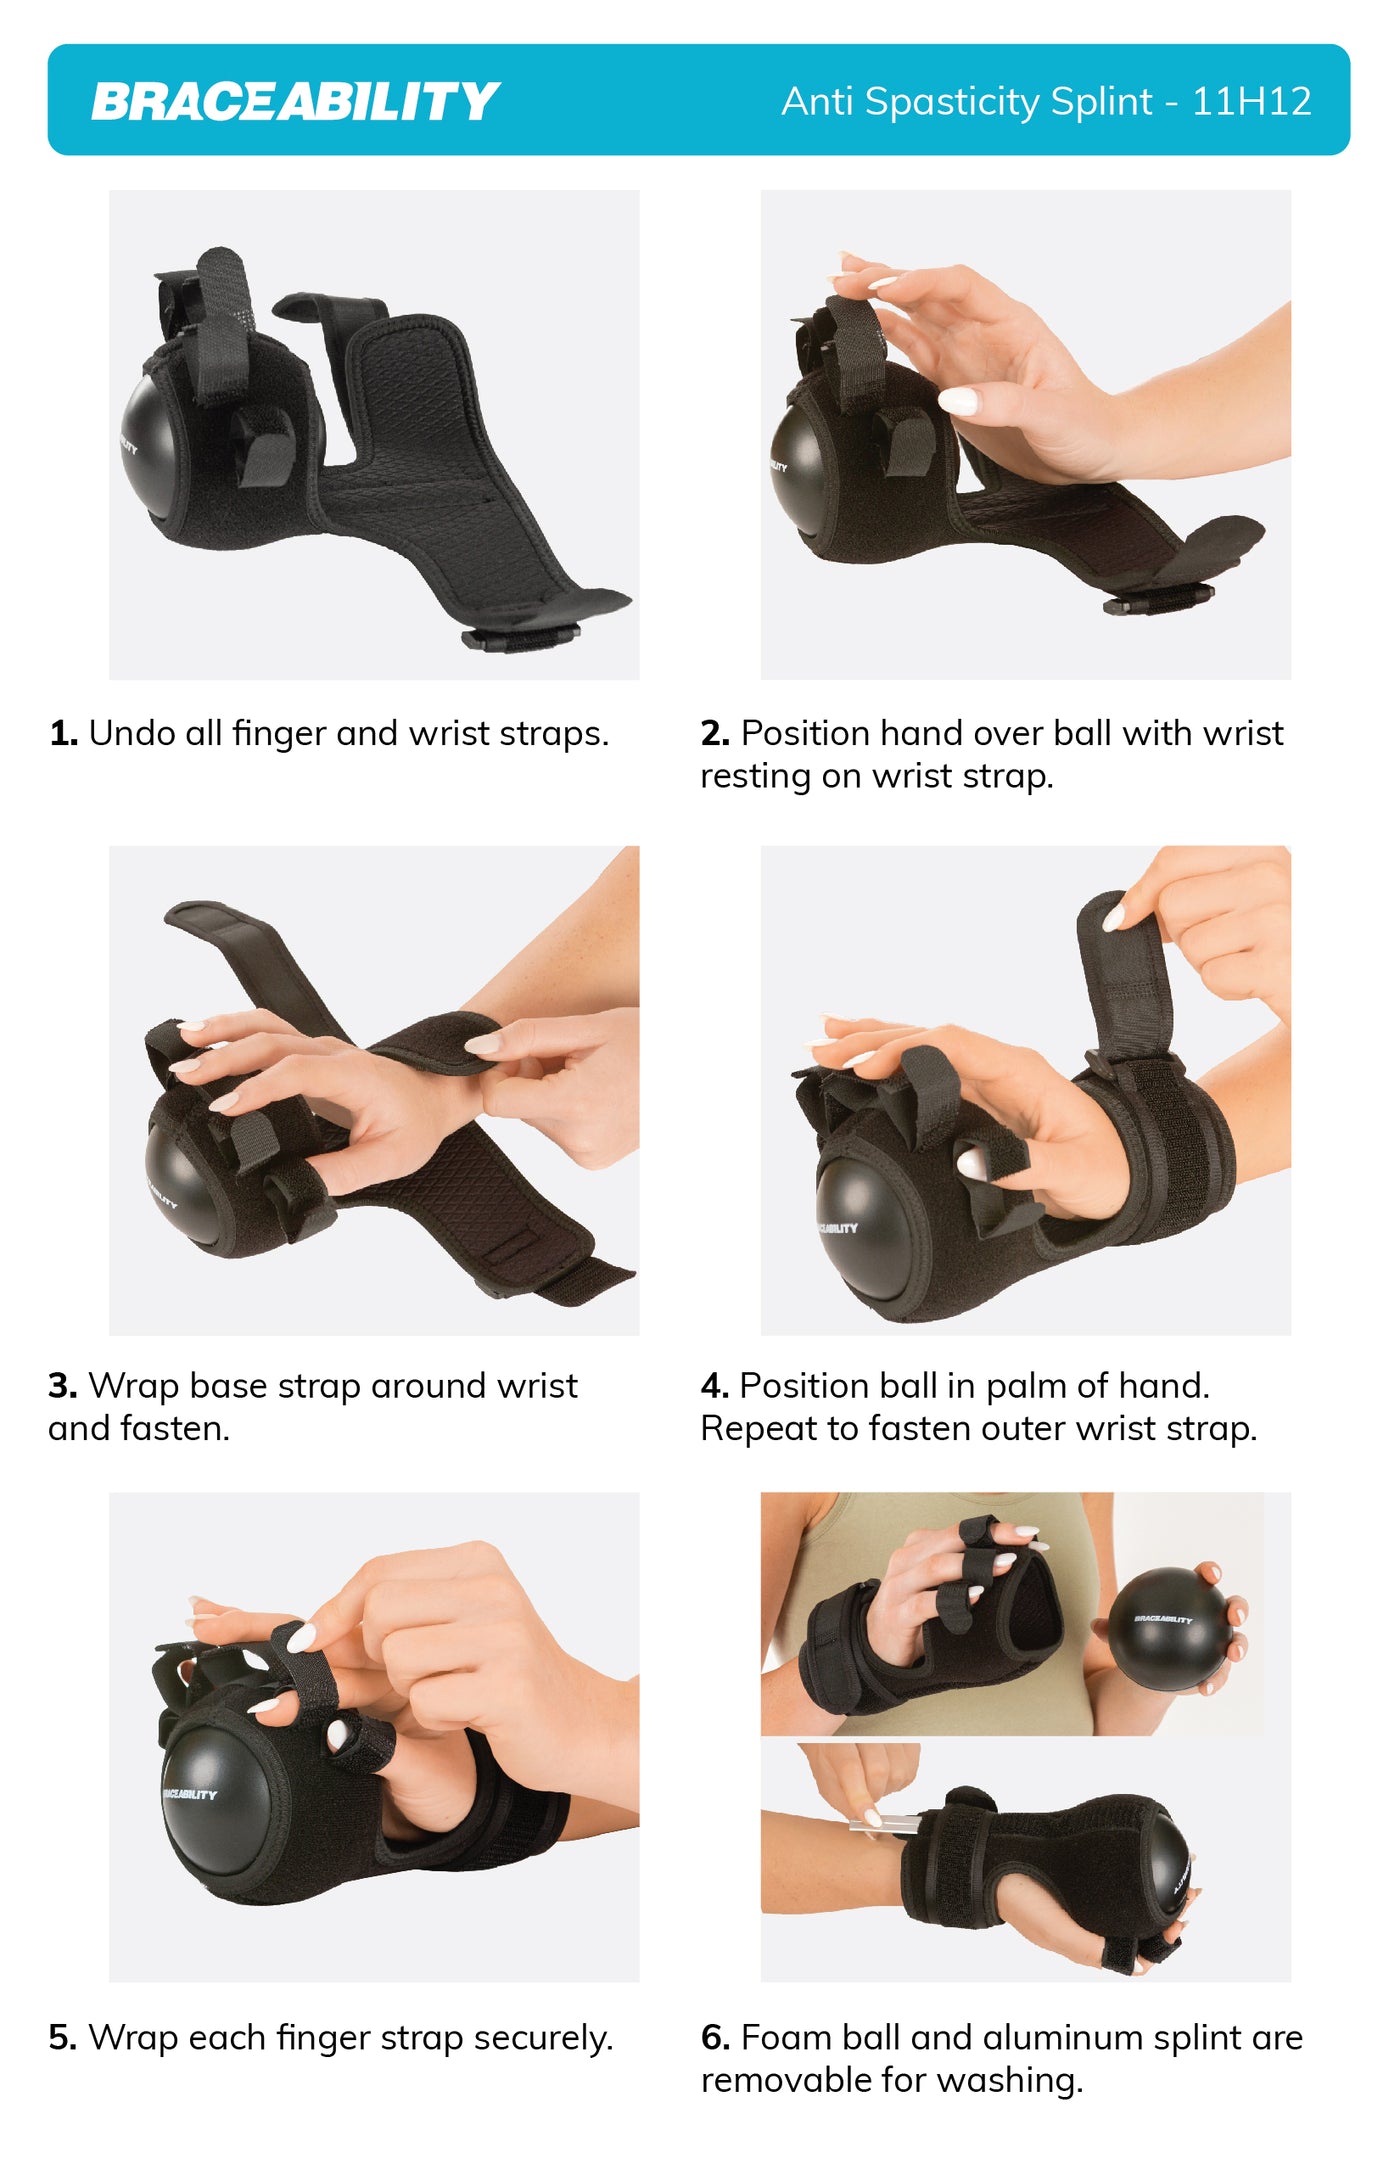 Instruction sheet for how to apply the anti spasticity splint by braceability